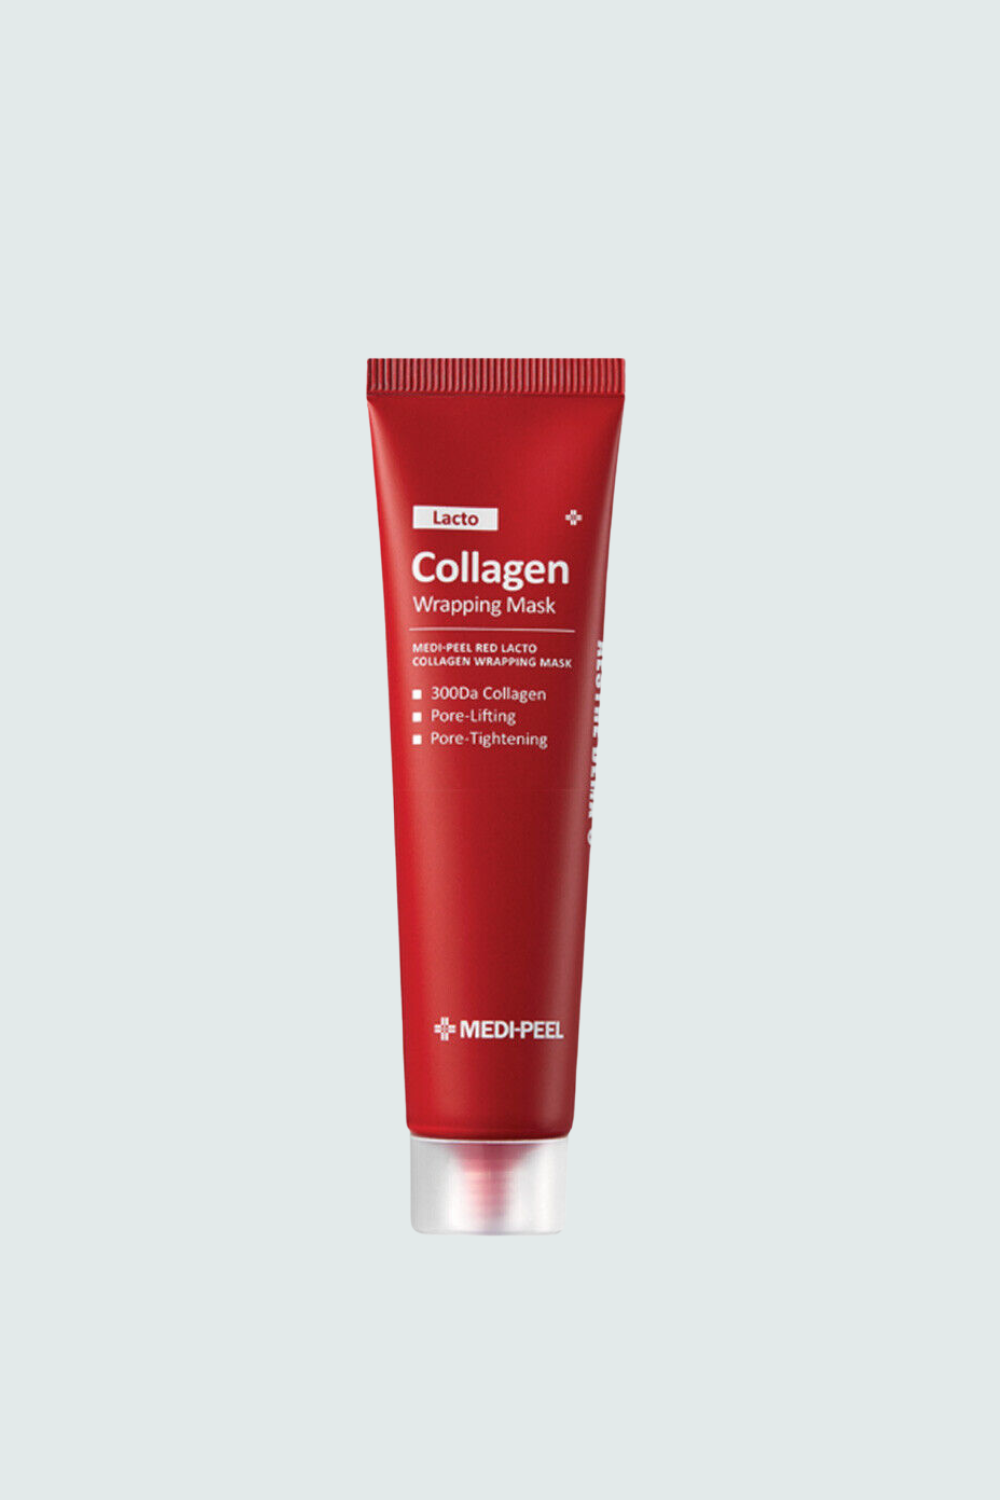 Red Lacto Collagen Wrapping Mask - 70ml MEDI-PEEL